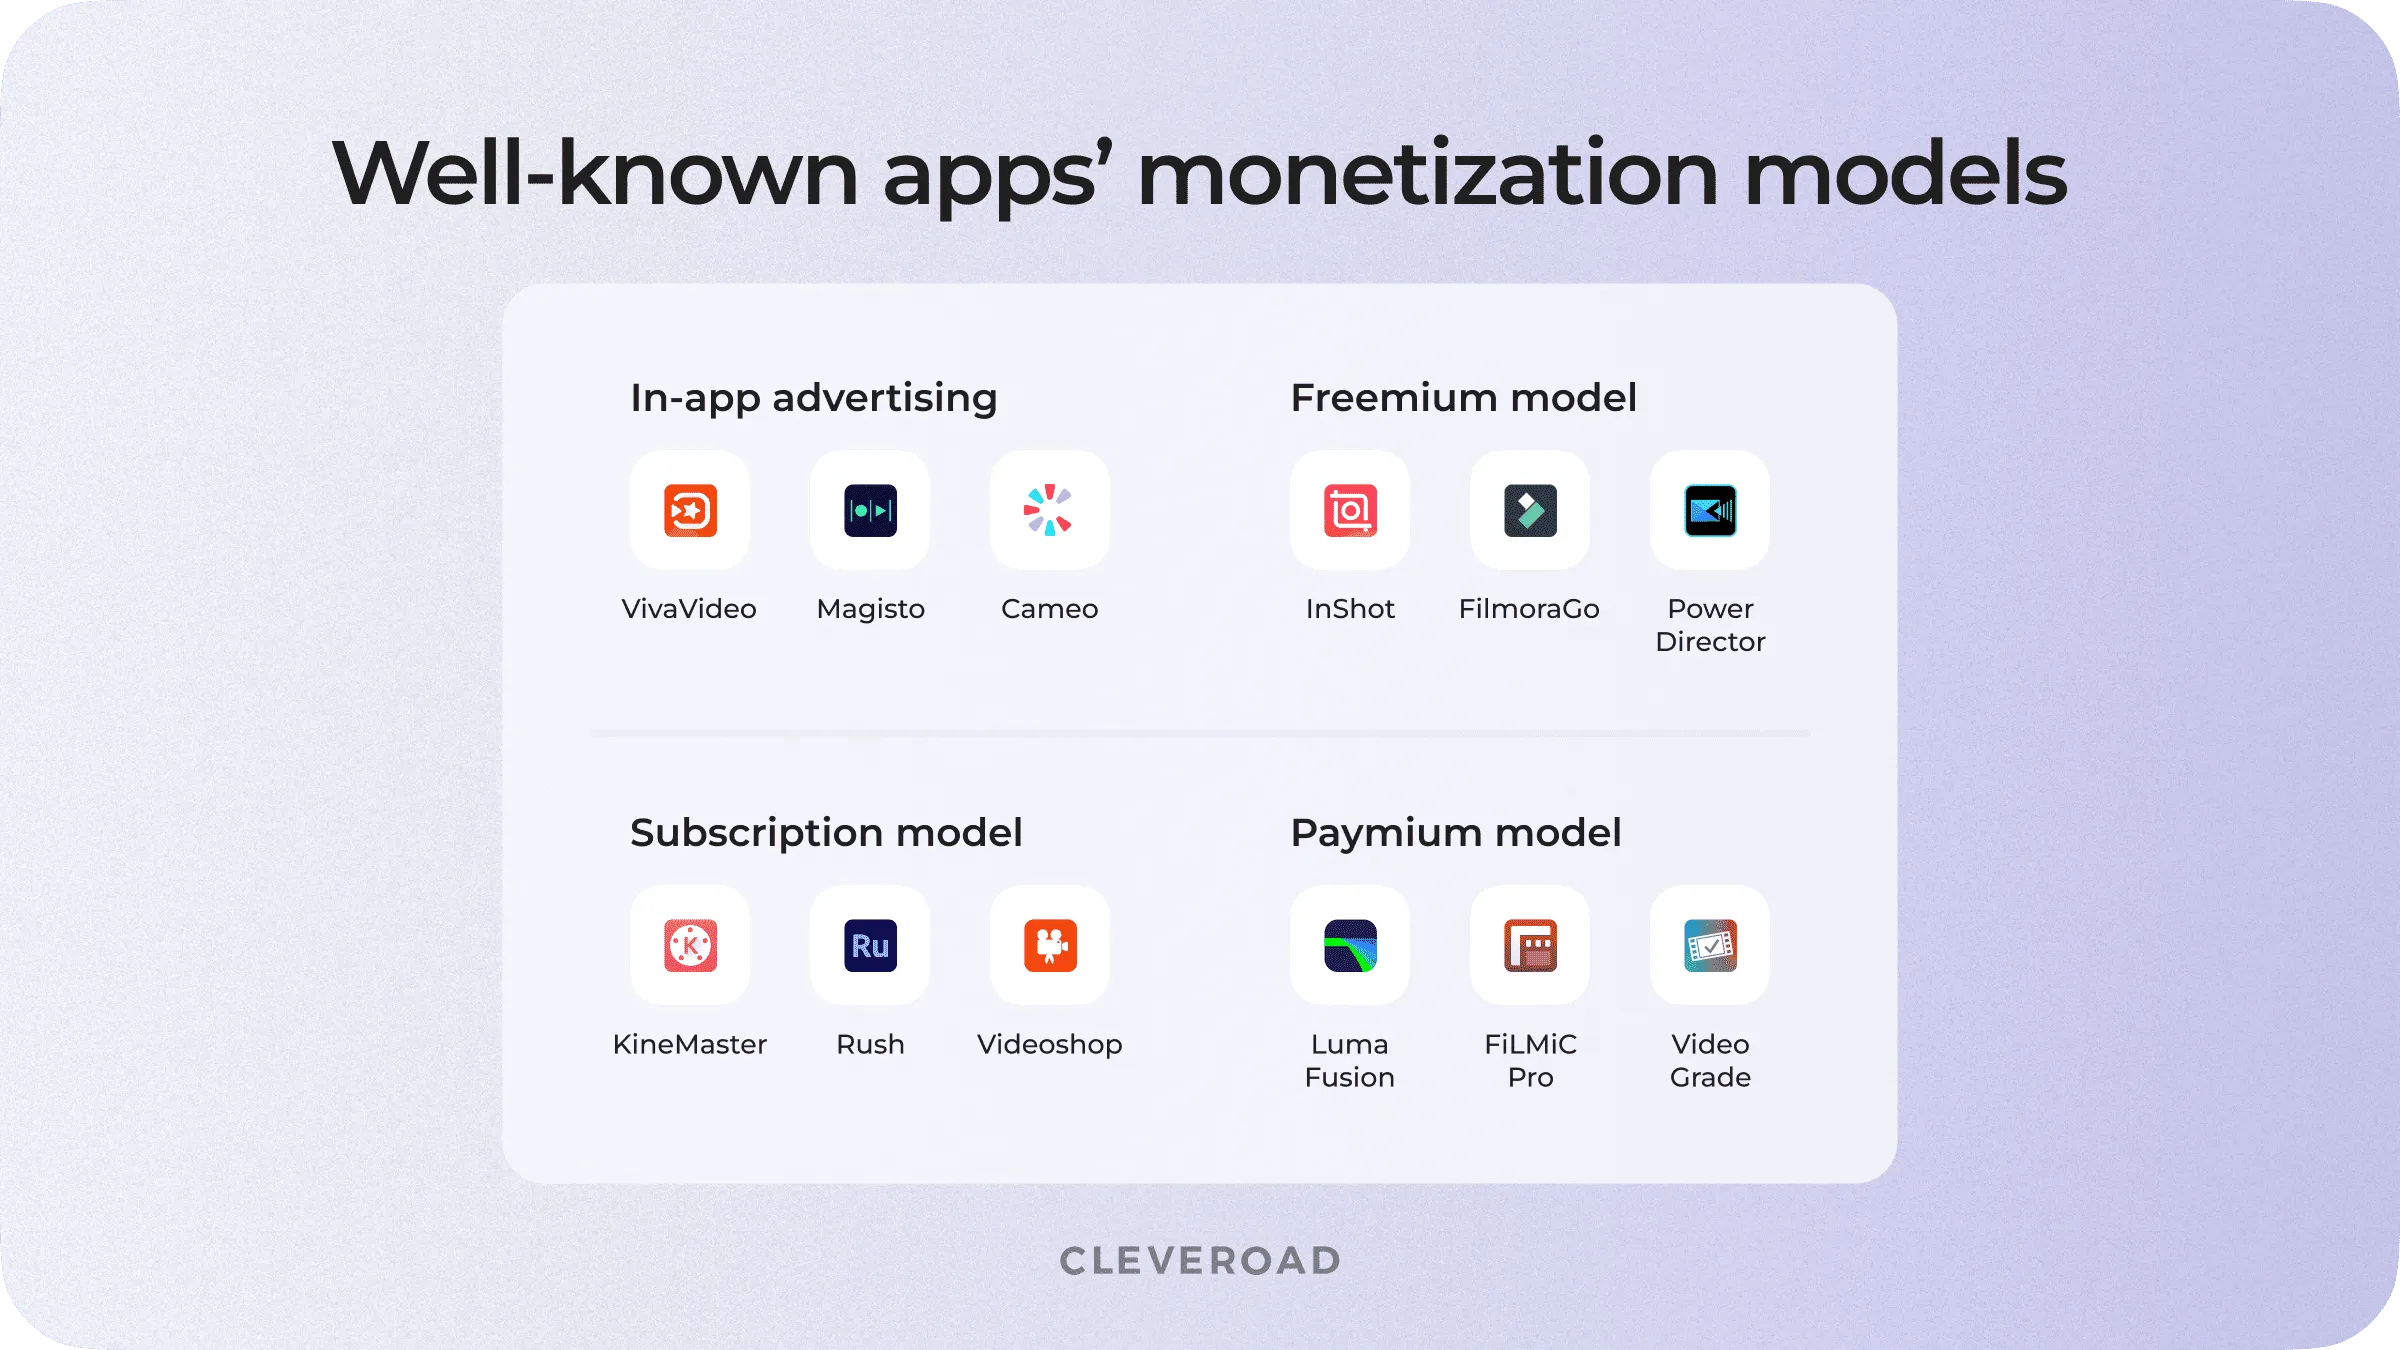 Famous video editing apps and their monetization models.